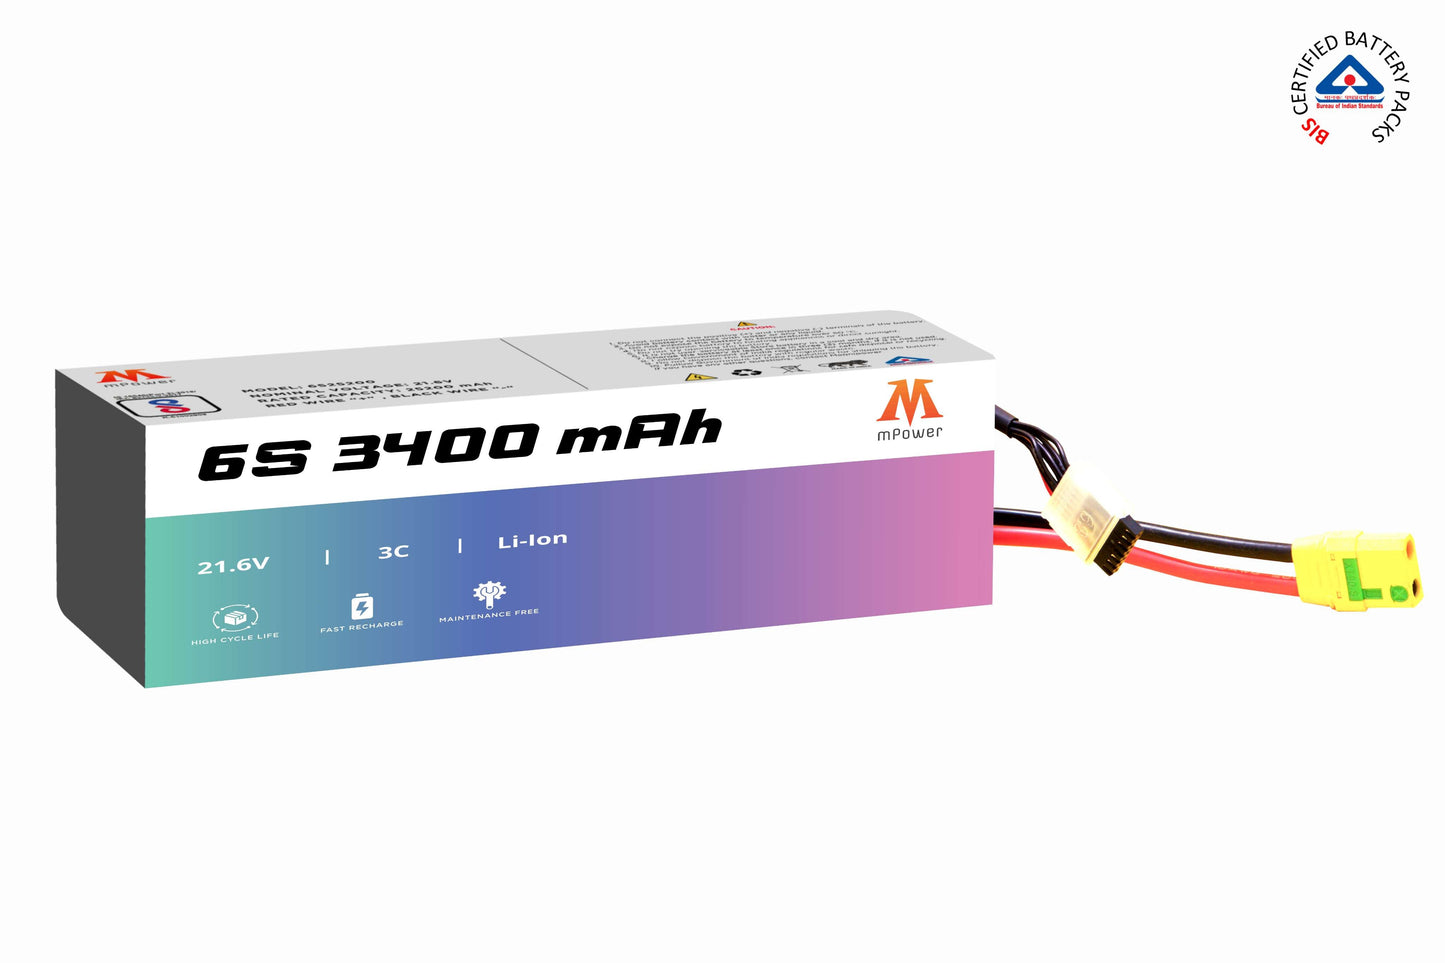 mPower 6S 3400mAh Lithium-Ion Battery for Surveillance Drones